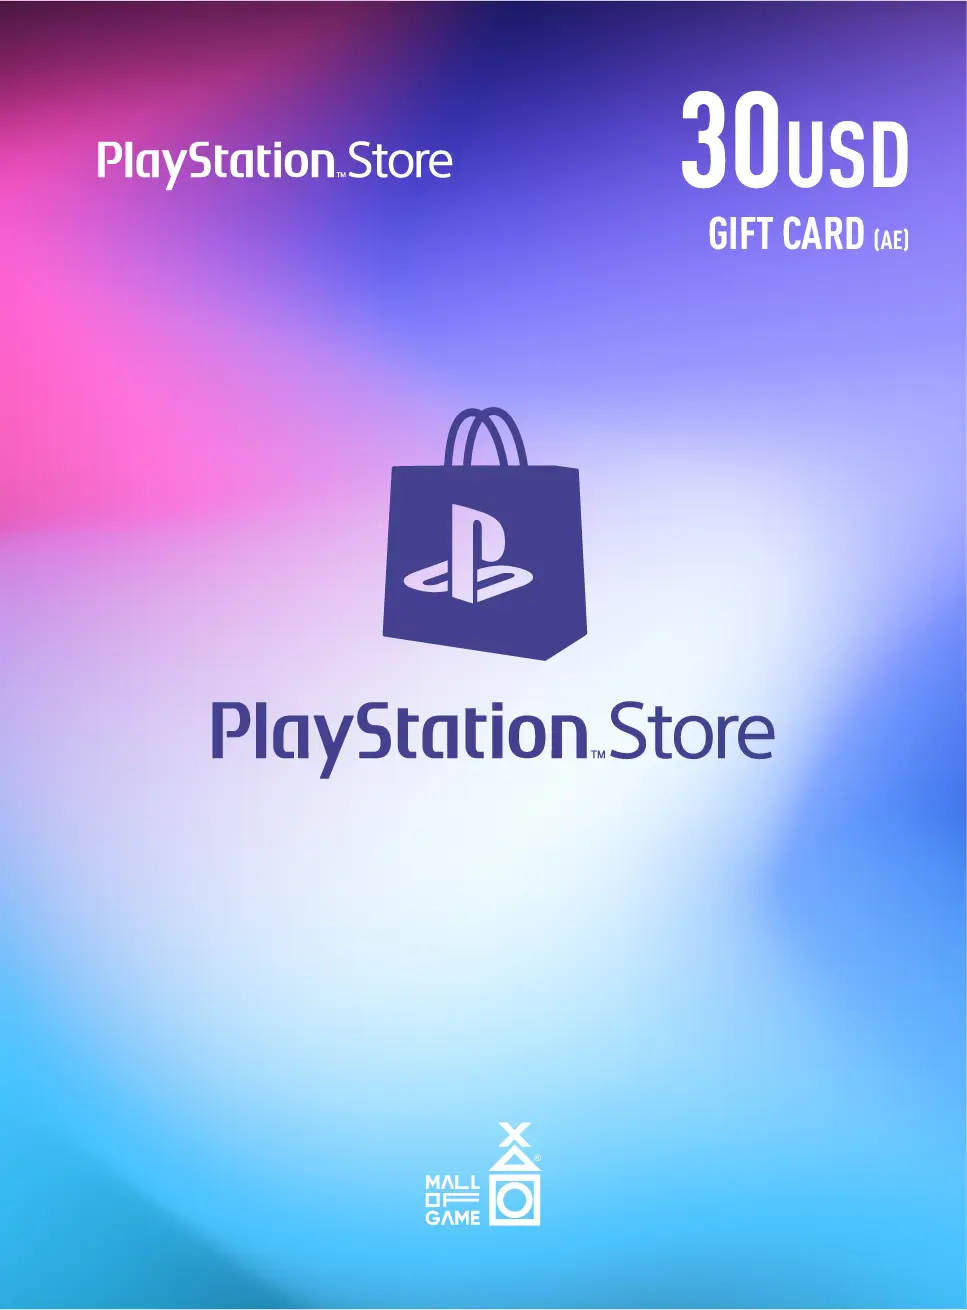 PlayStation™Store USD30 Gift Cards (AE)